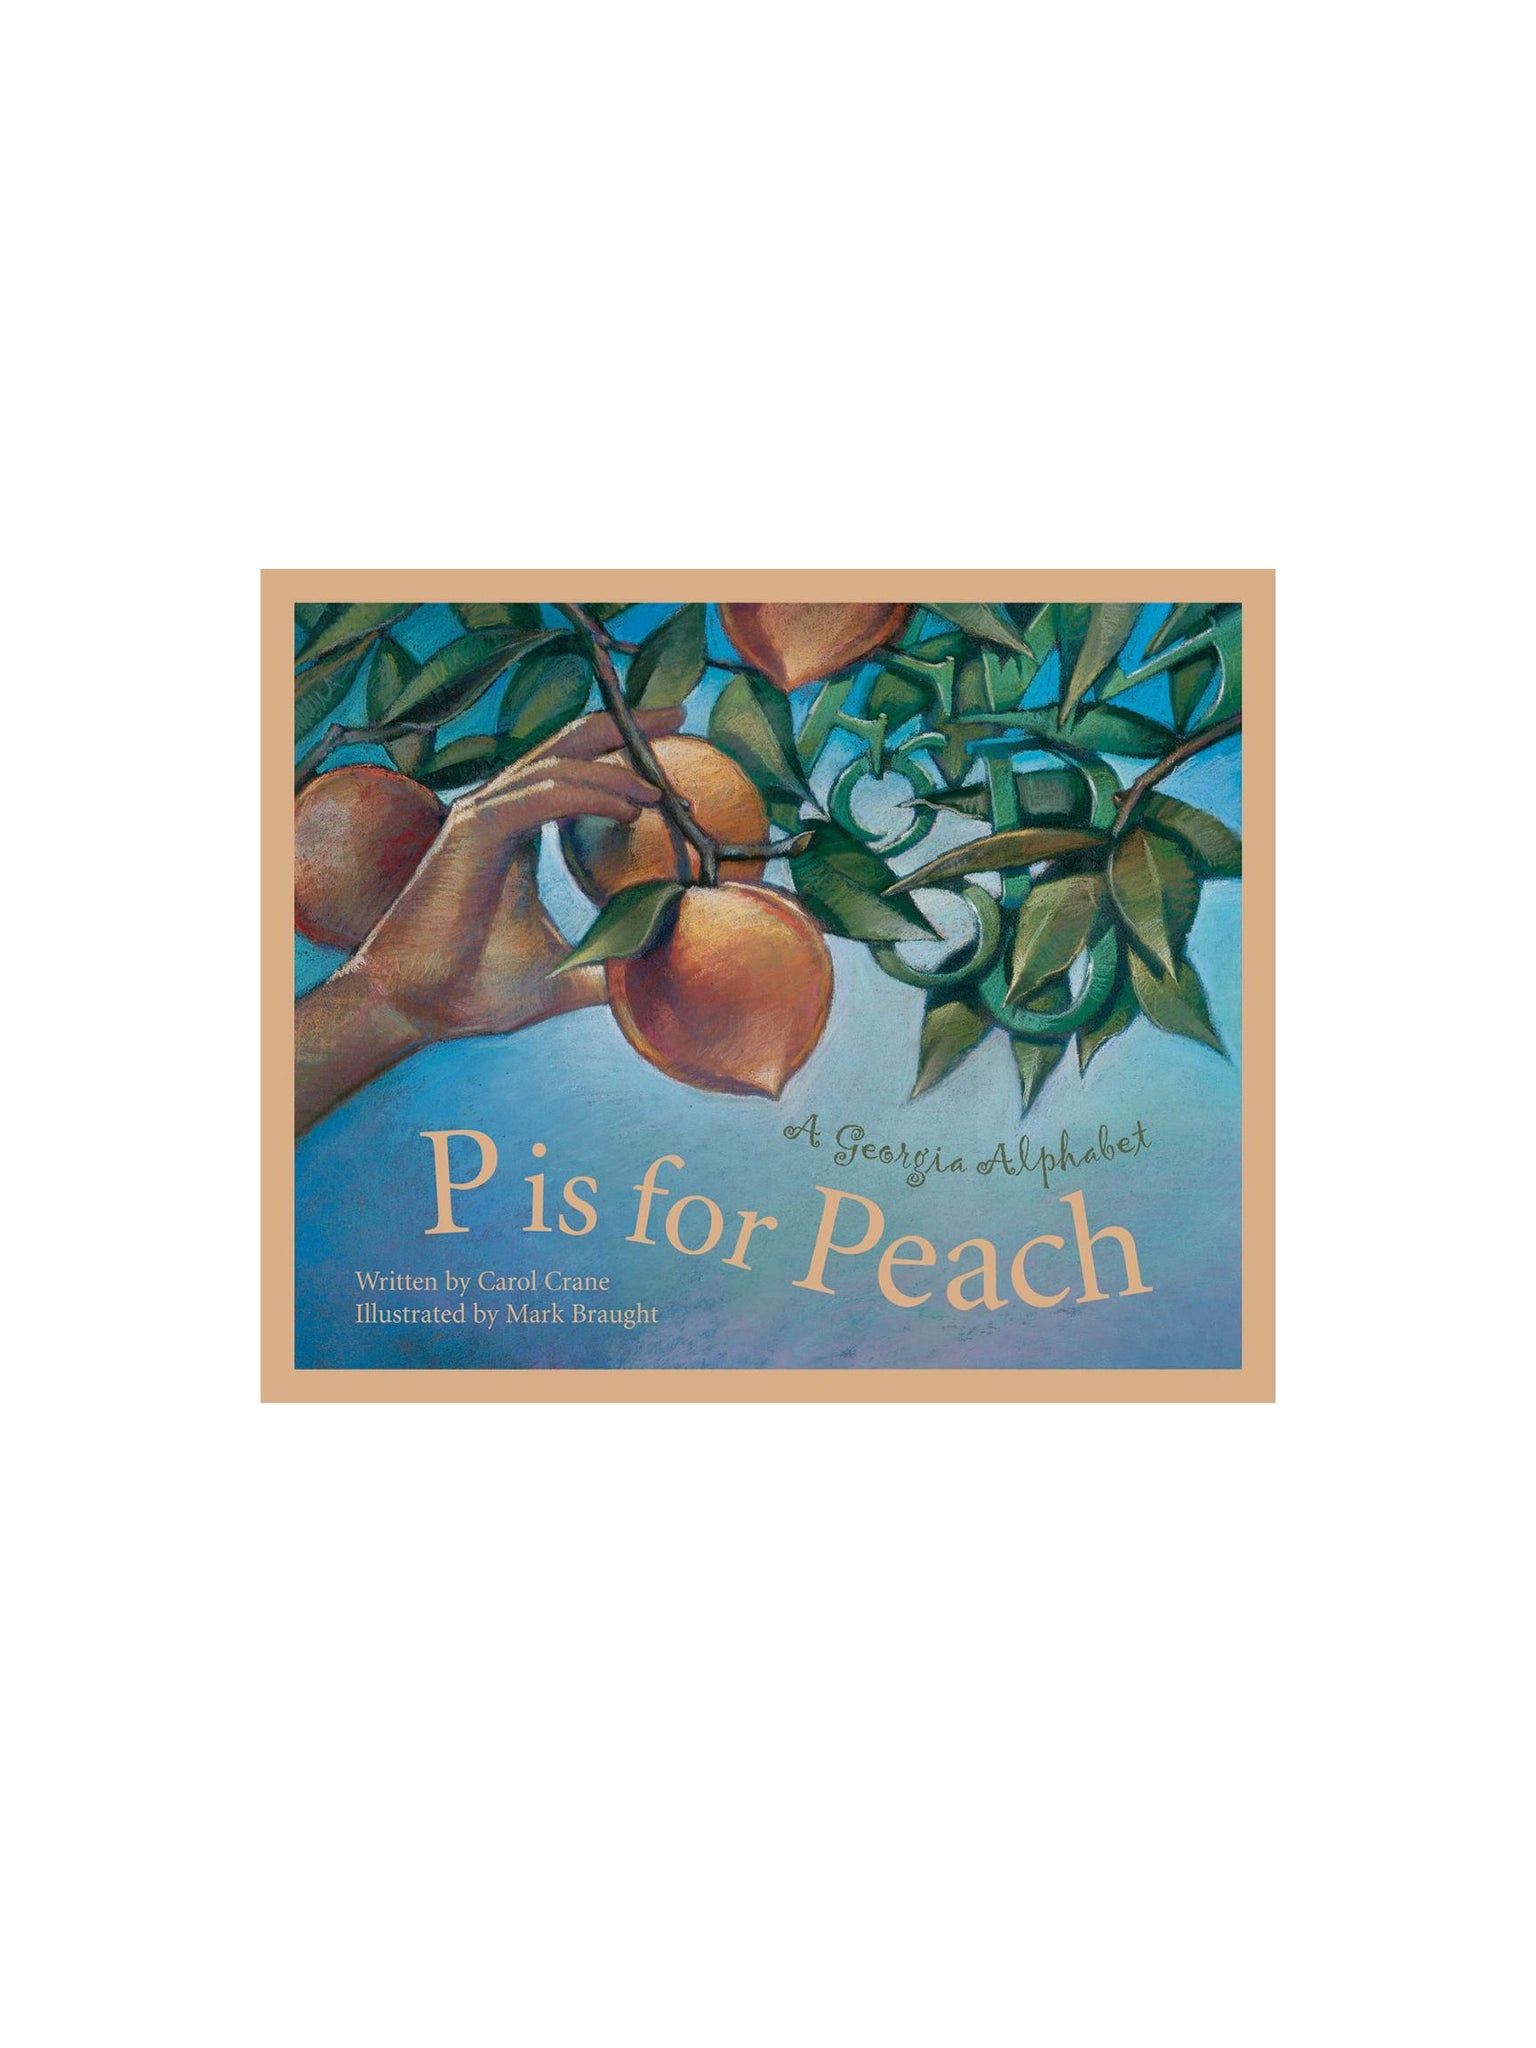 p is for peach book